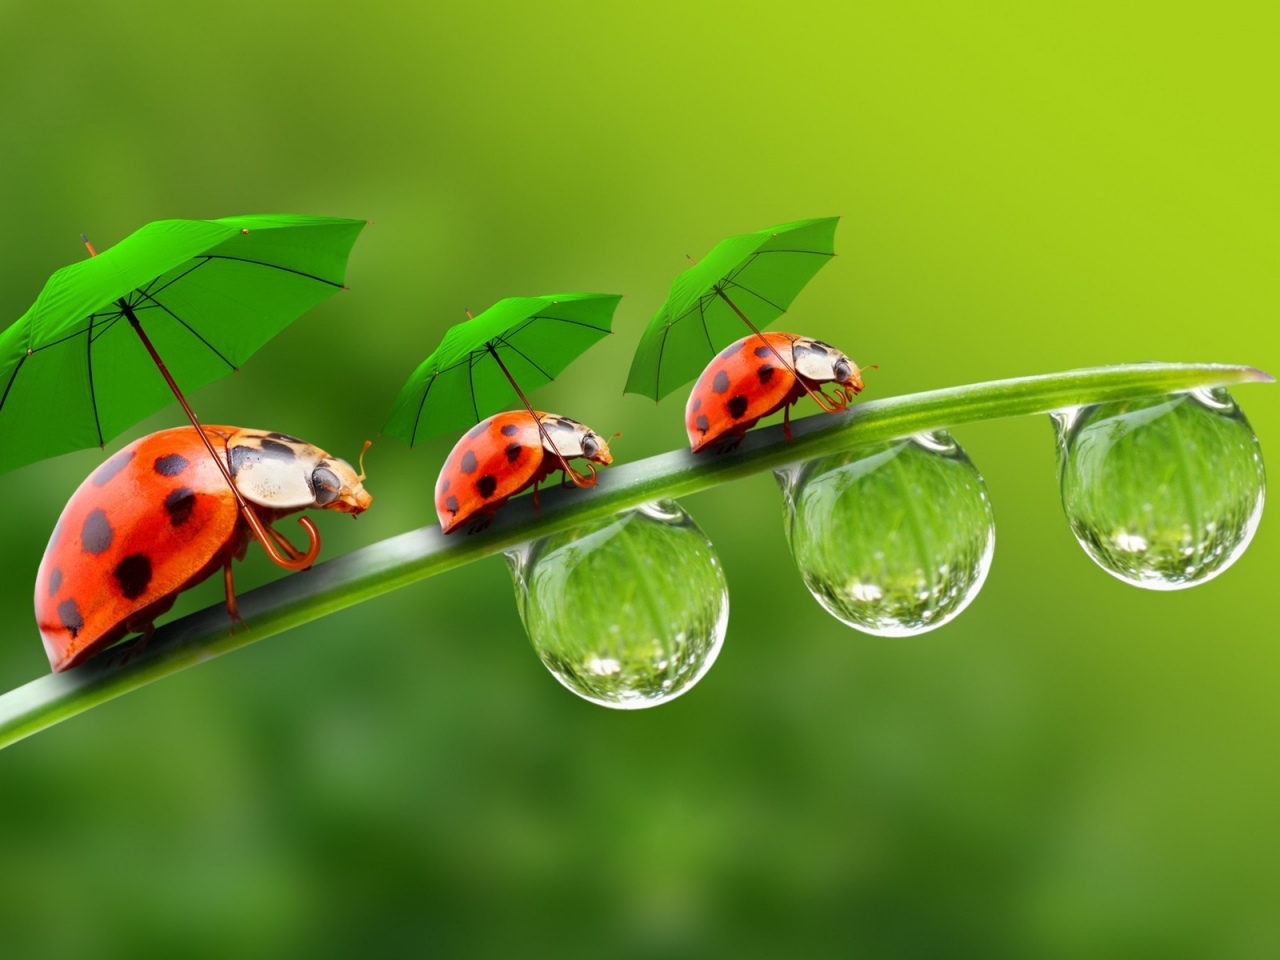 Ladybugs with Umbrellas for 1280 x 960 resolution